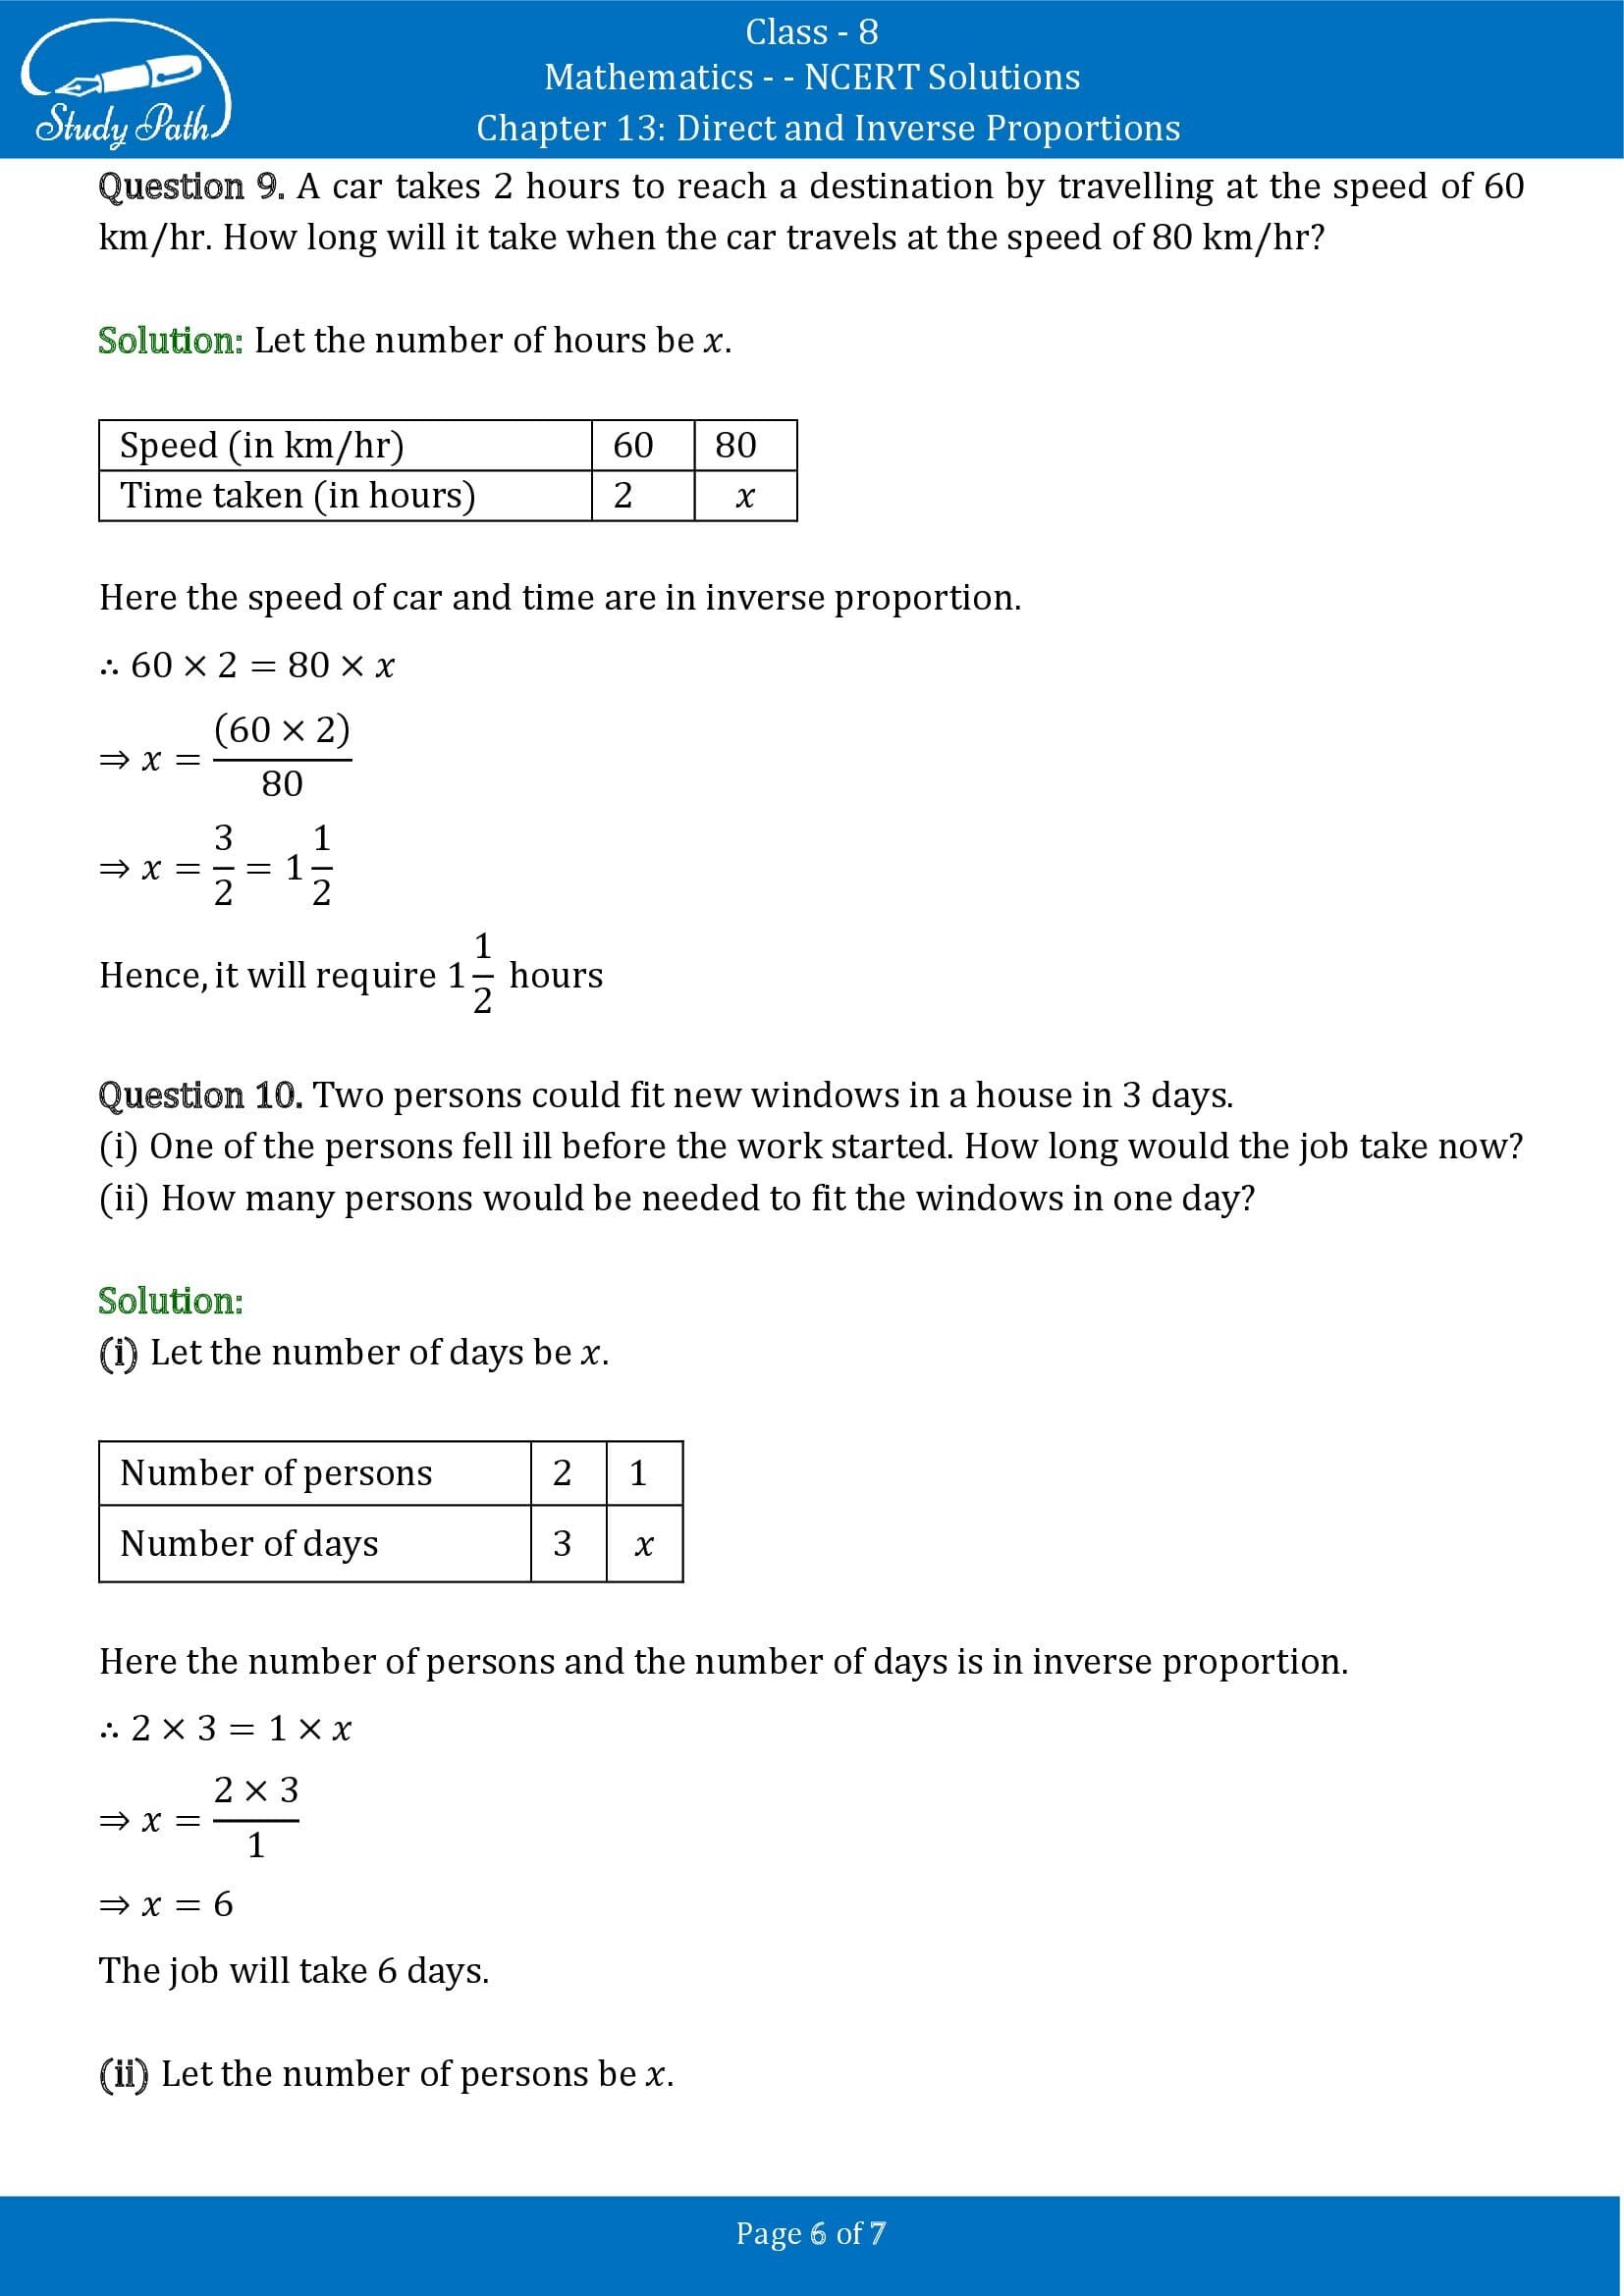 NCERT Solutions for Class 8 Maths Chapter 13 Direct and Inverse Proportions Exercise 13.2 00006